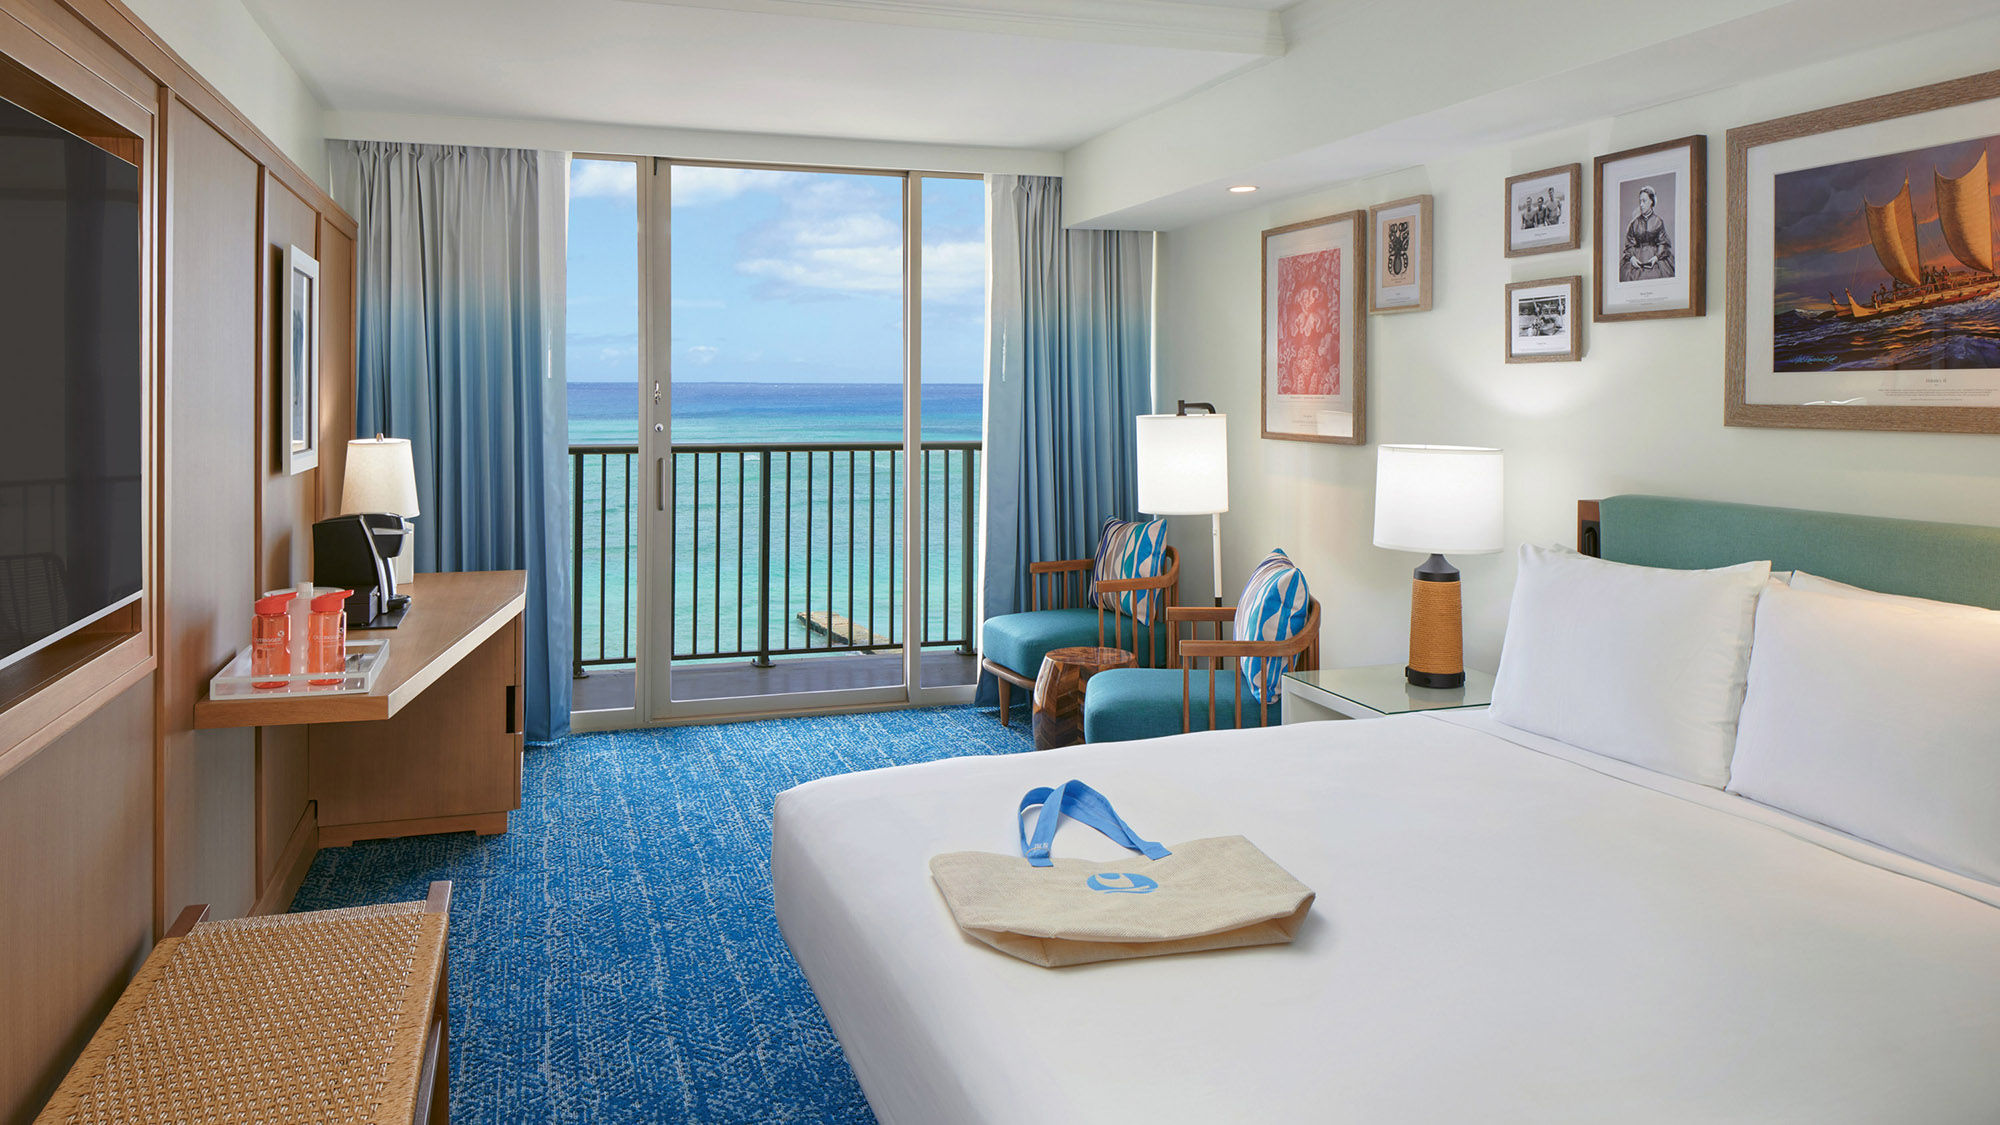 A guestroom at the Outrigger Reef Waikiki Beach Resort, which recently completed an $80 million renovation.